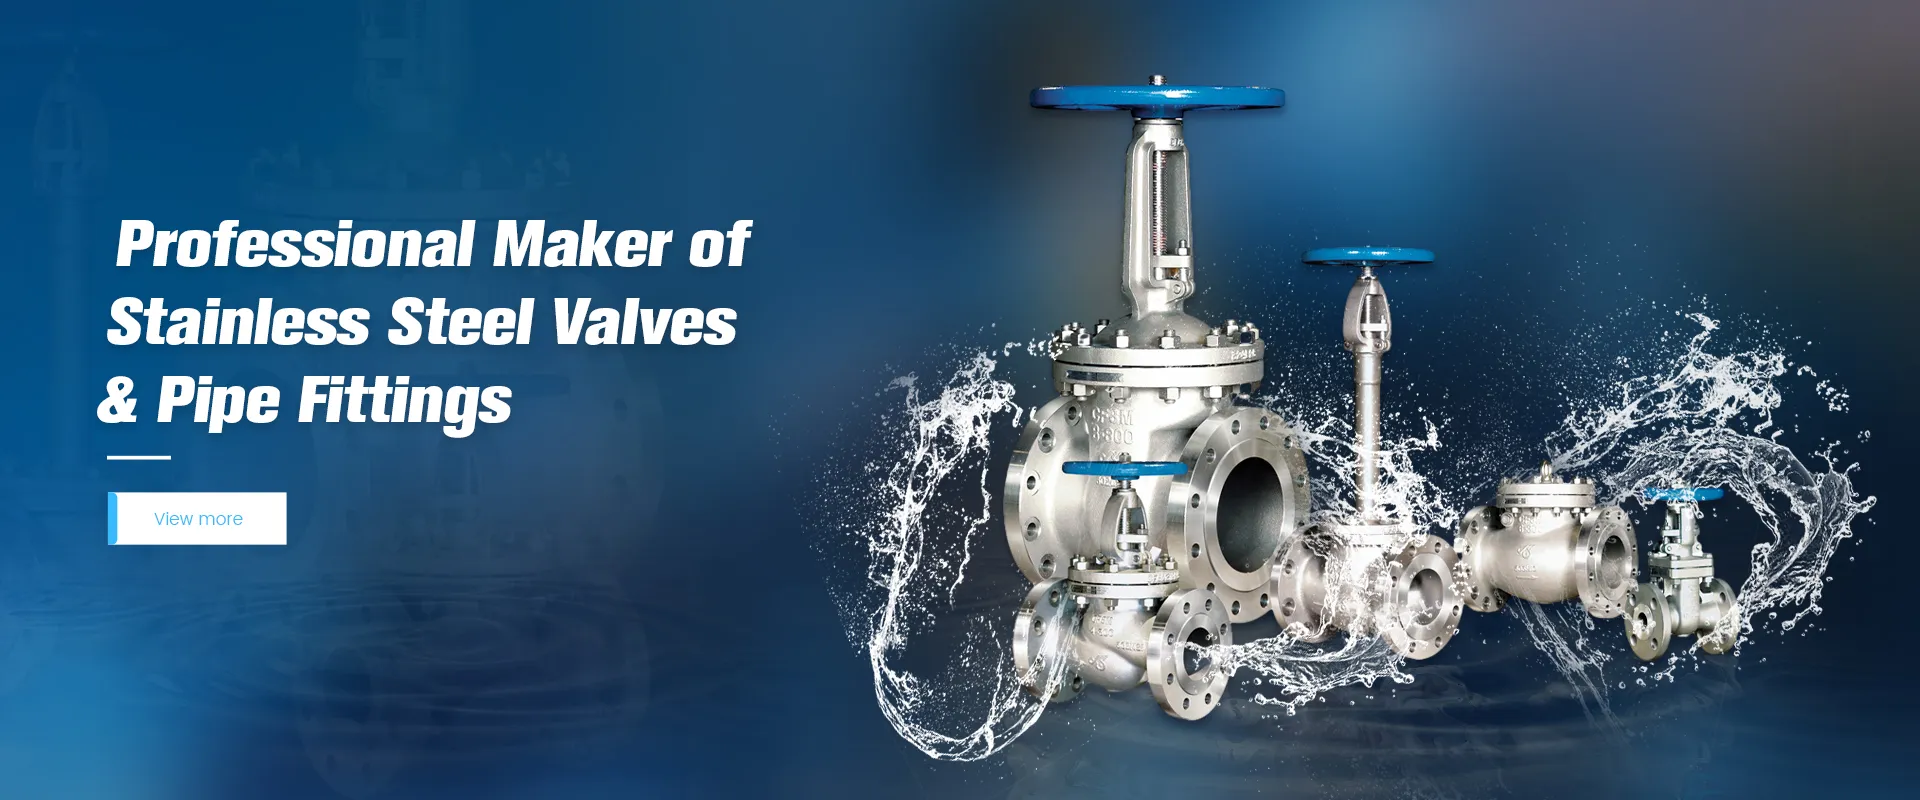 Professional Maker of Stainless Steel Valves & Pipe Fittings